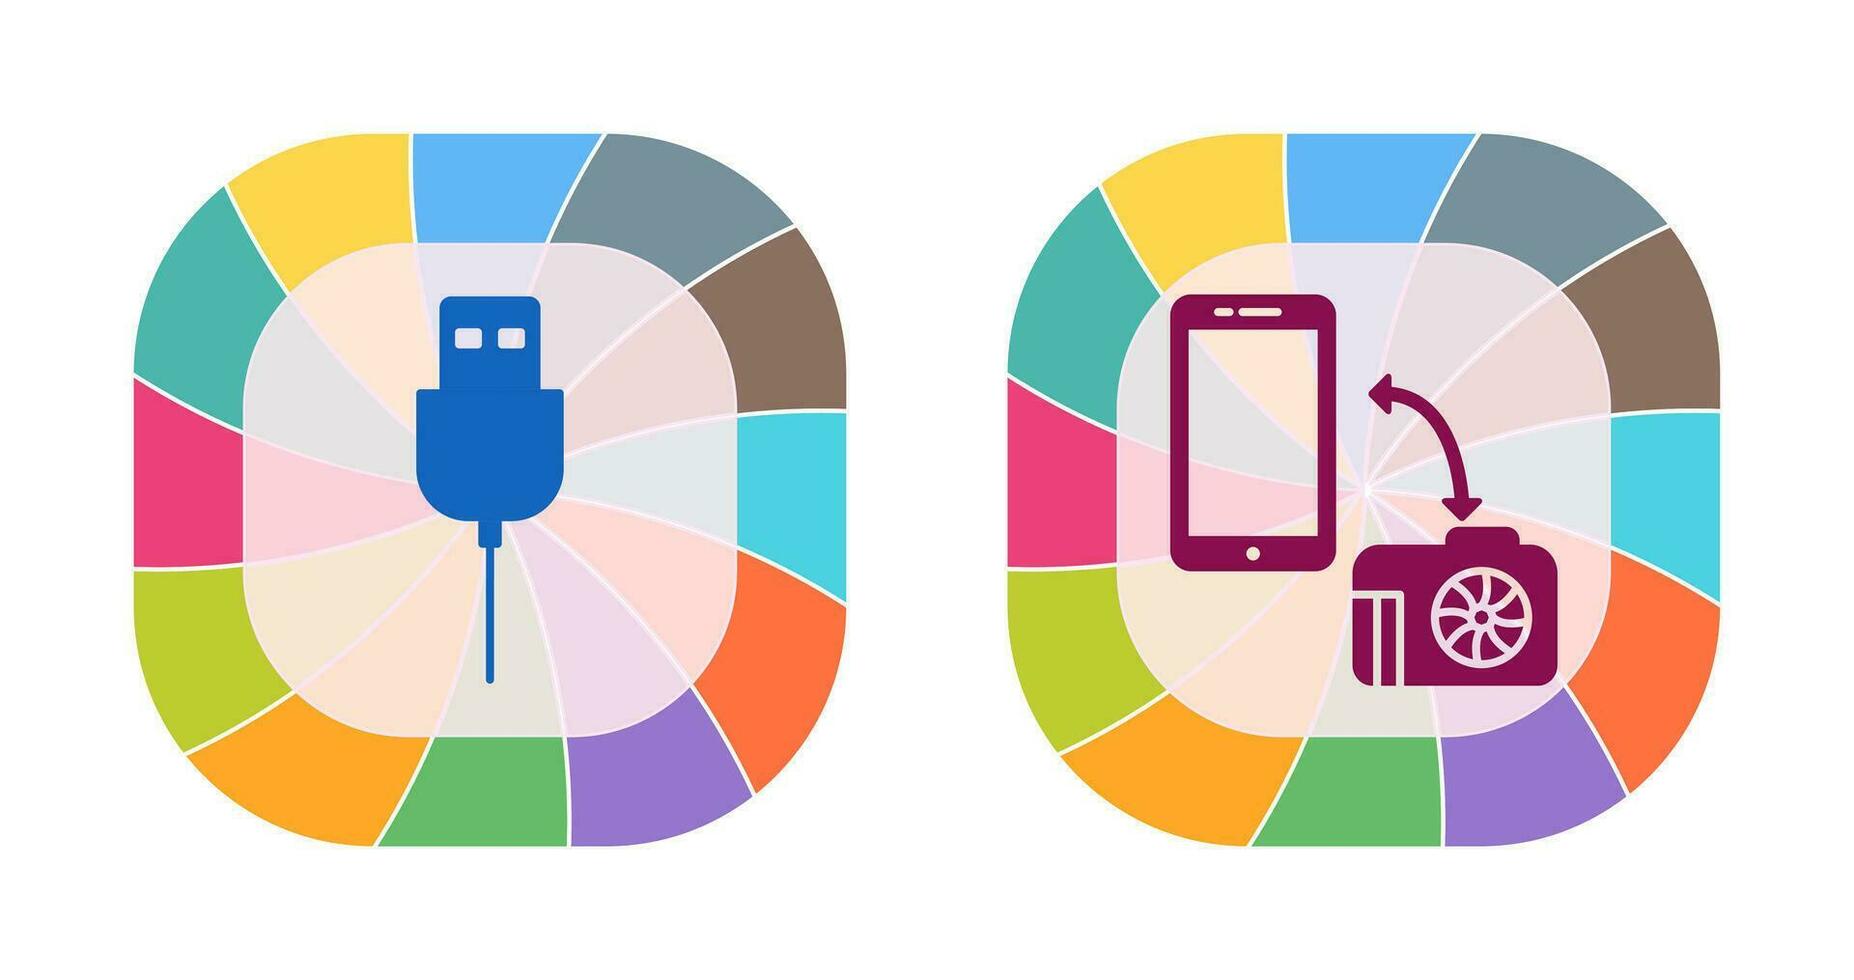 usb cable and transfer images Icon vector